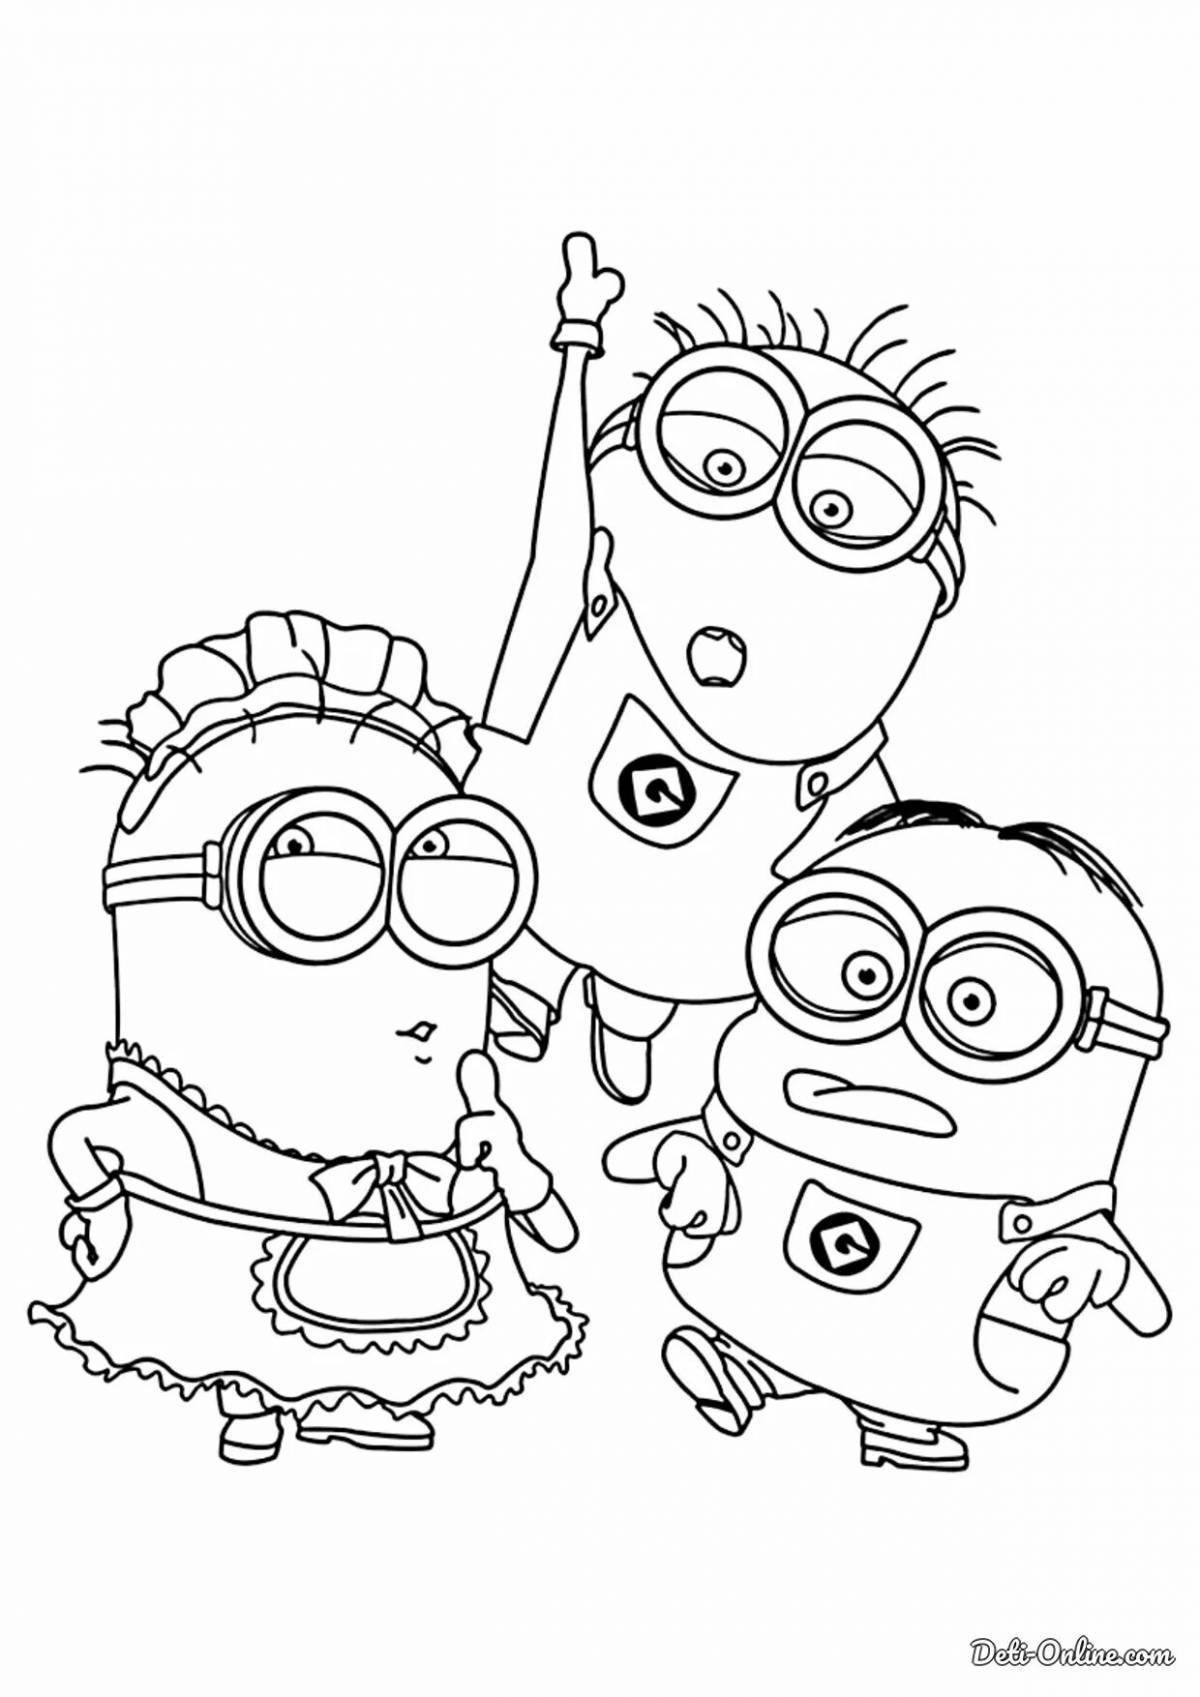 Coloring page minions despicable me